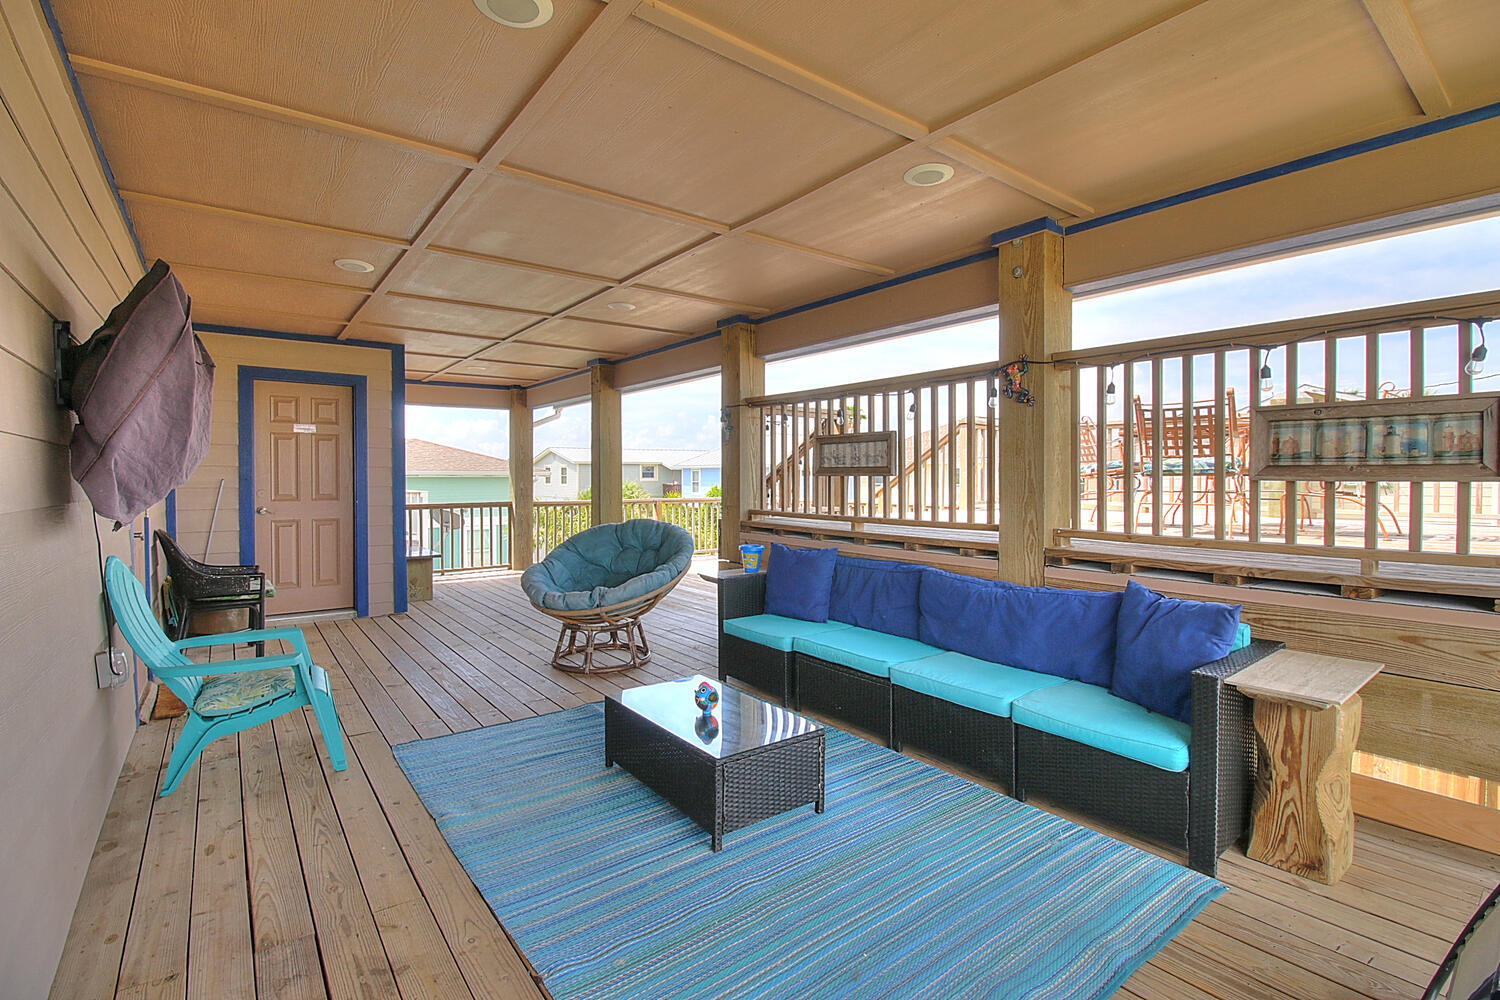 Covered deck with outdoor seating, and TV